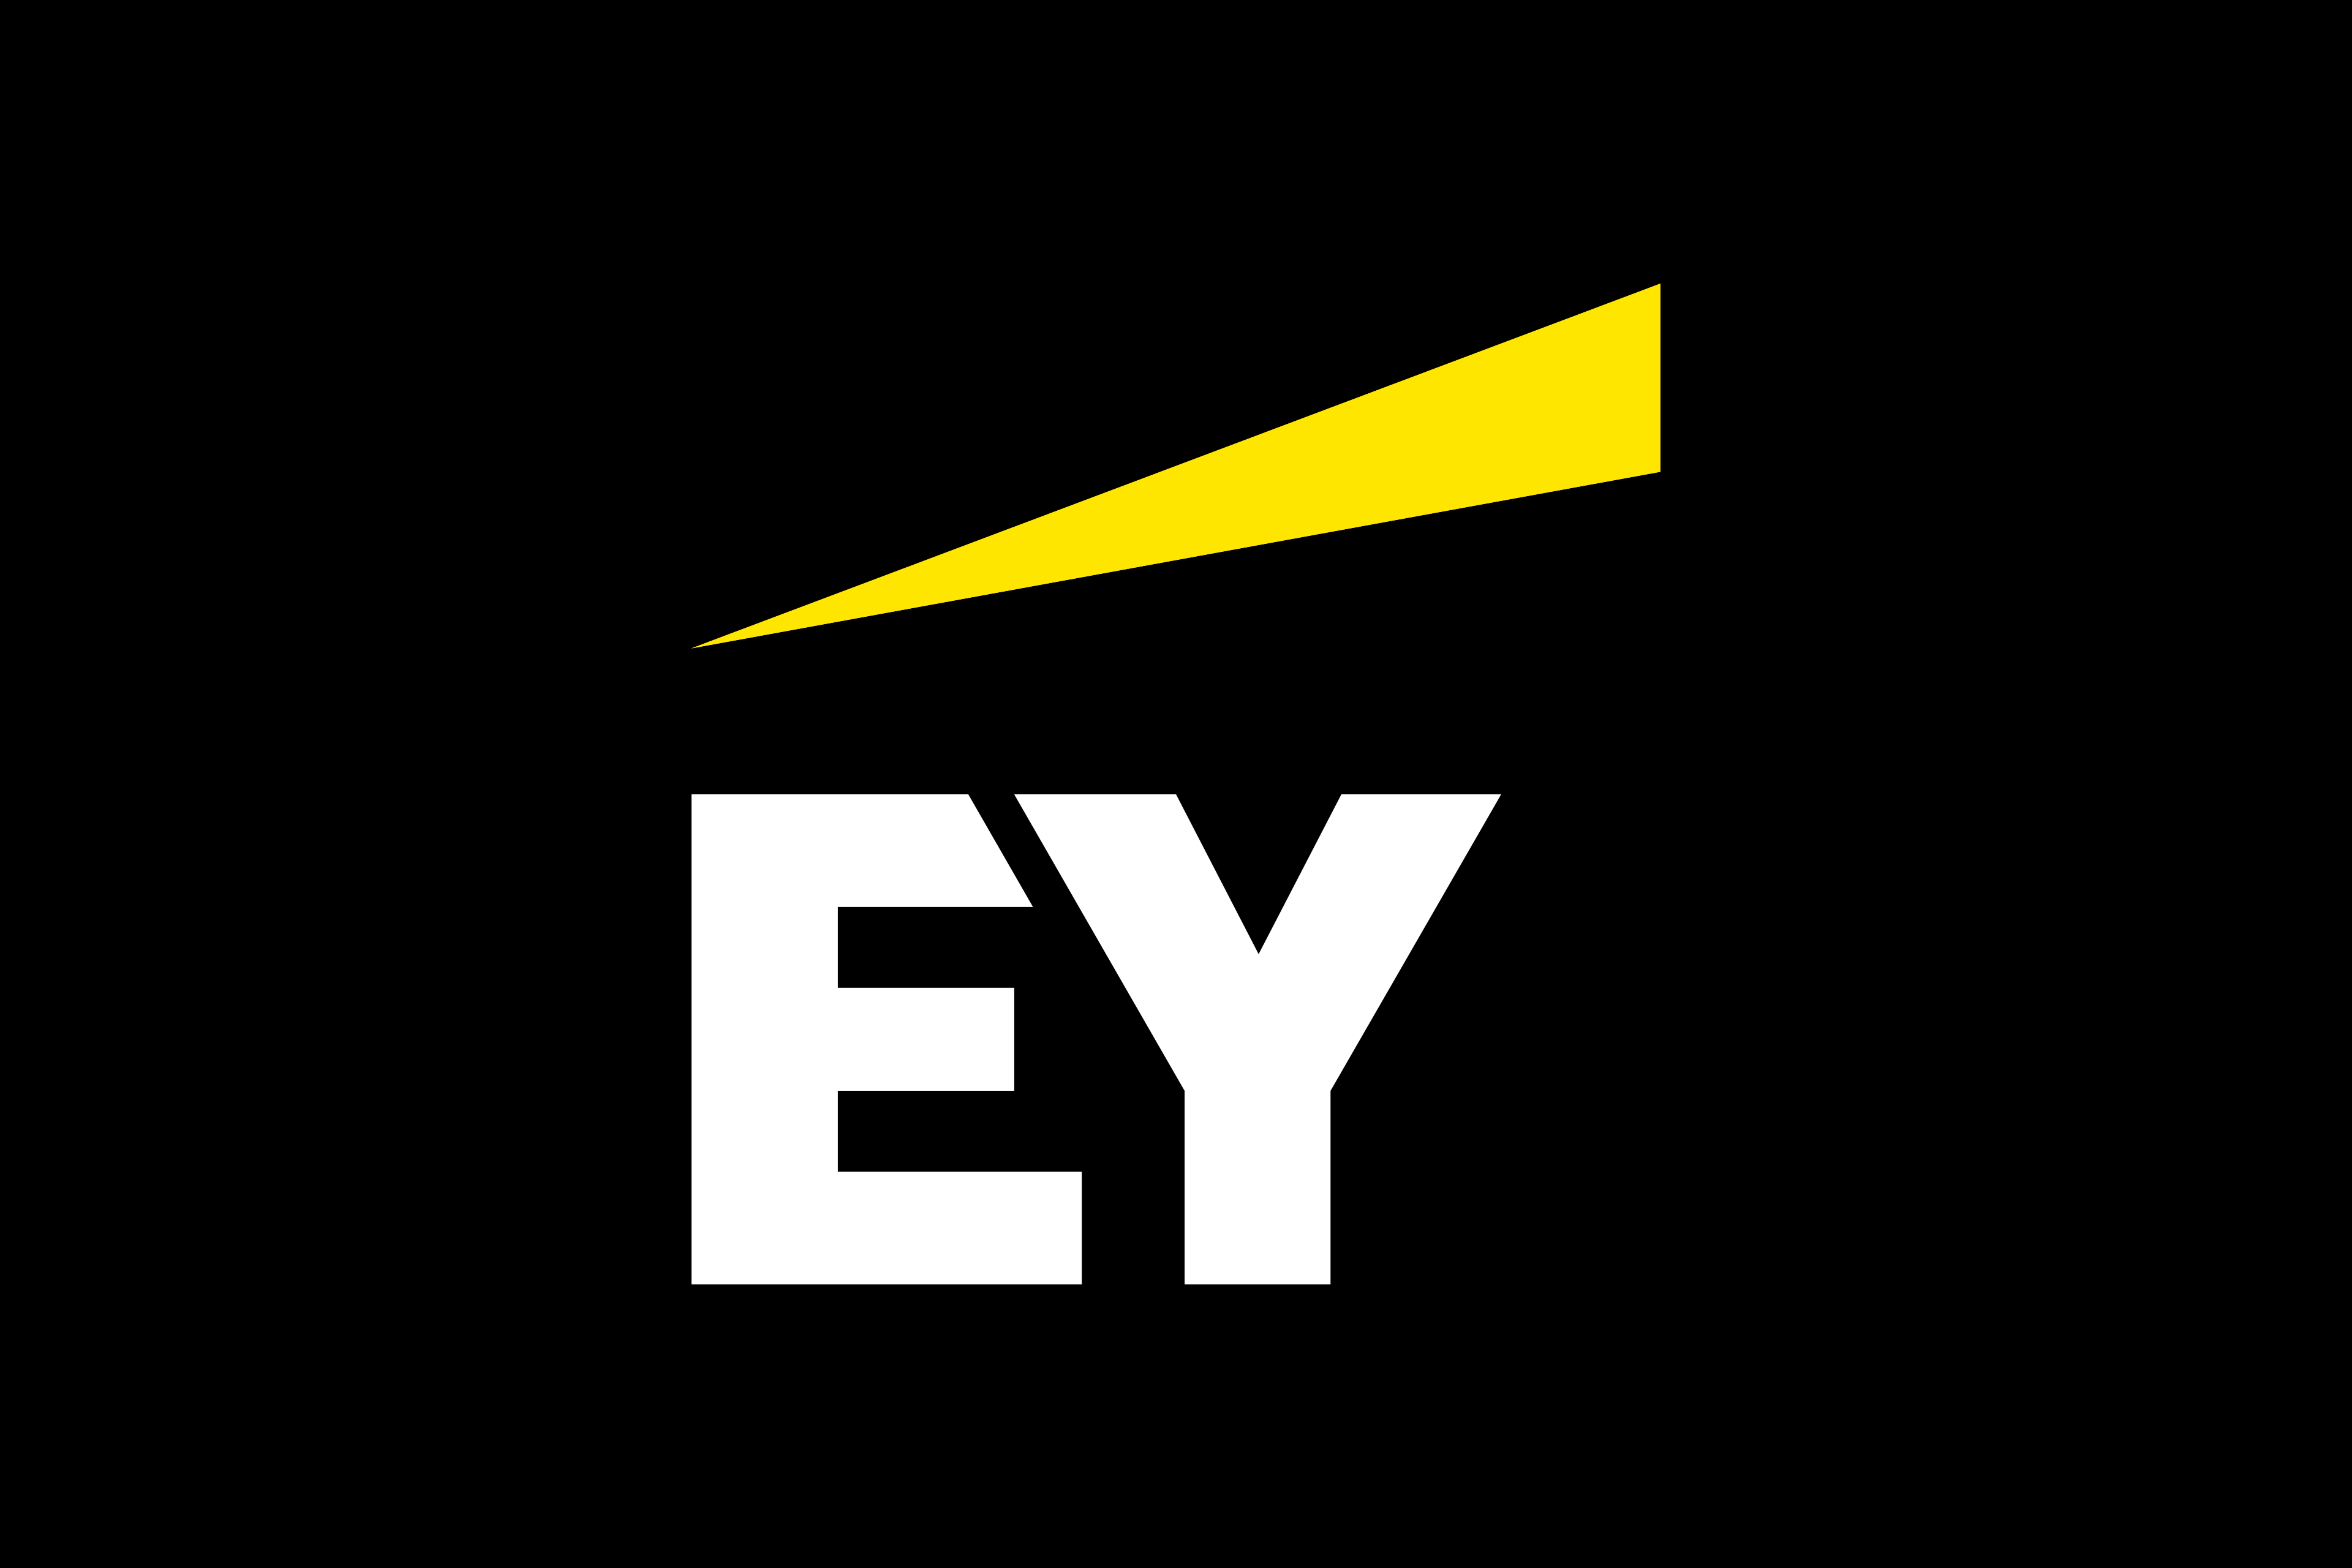 EY Acquires Consulting Services Provider whyaye